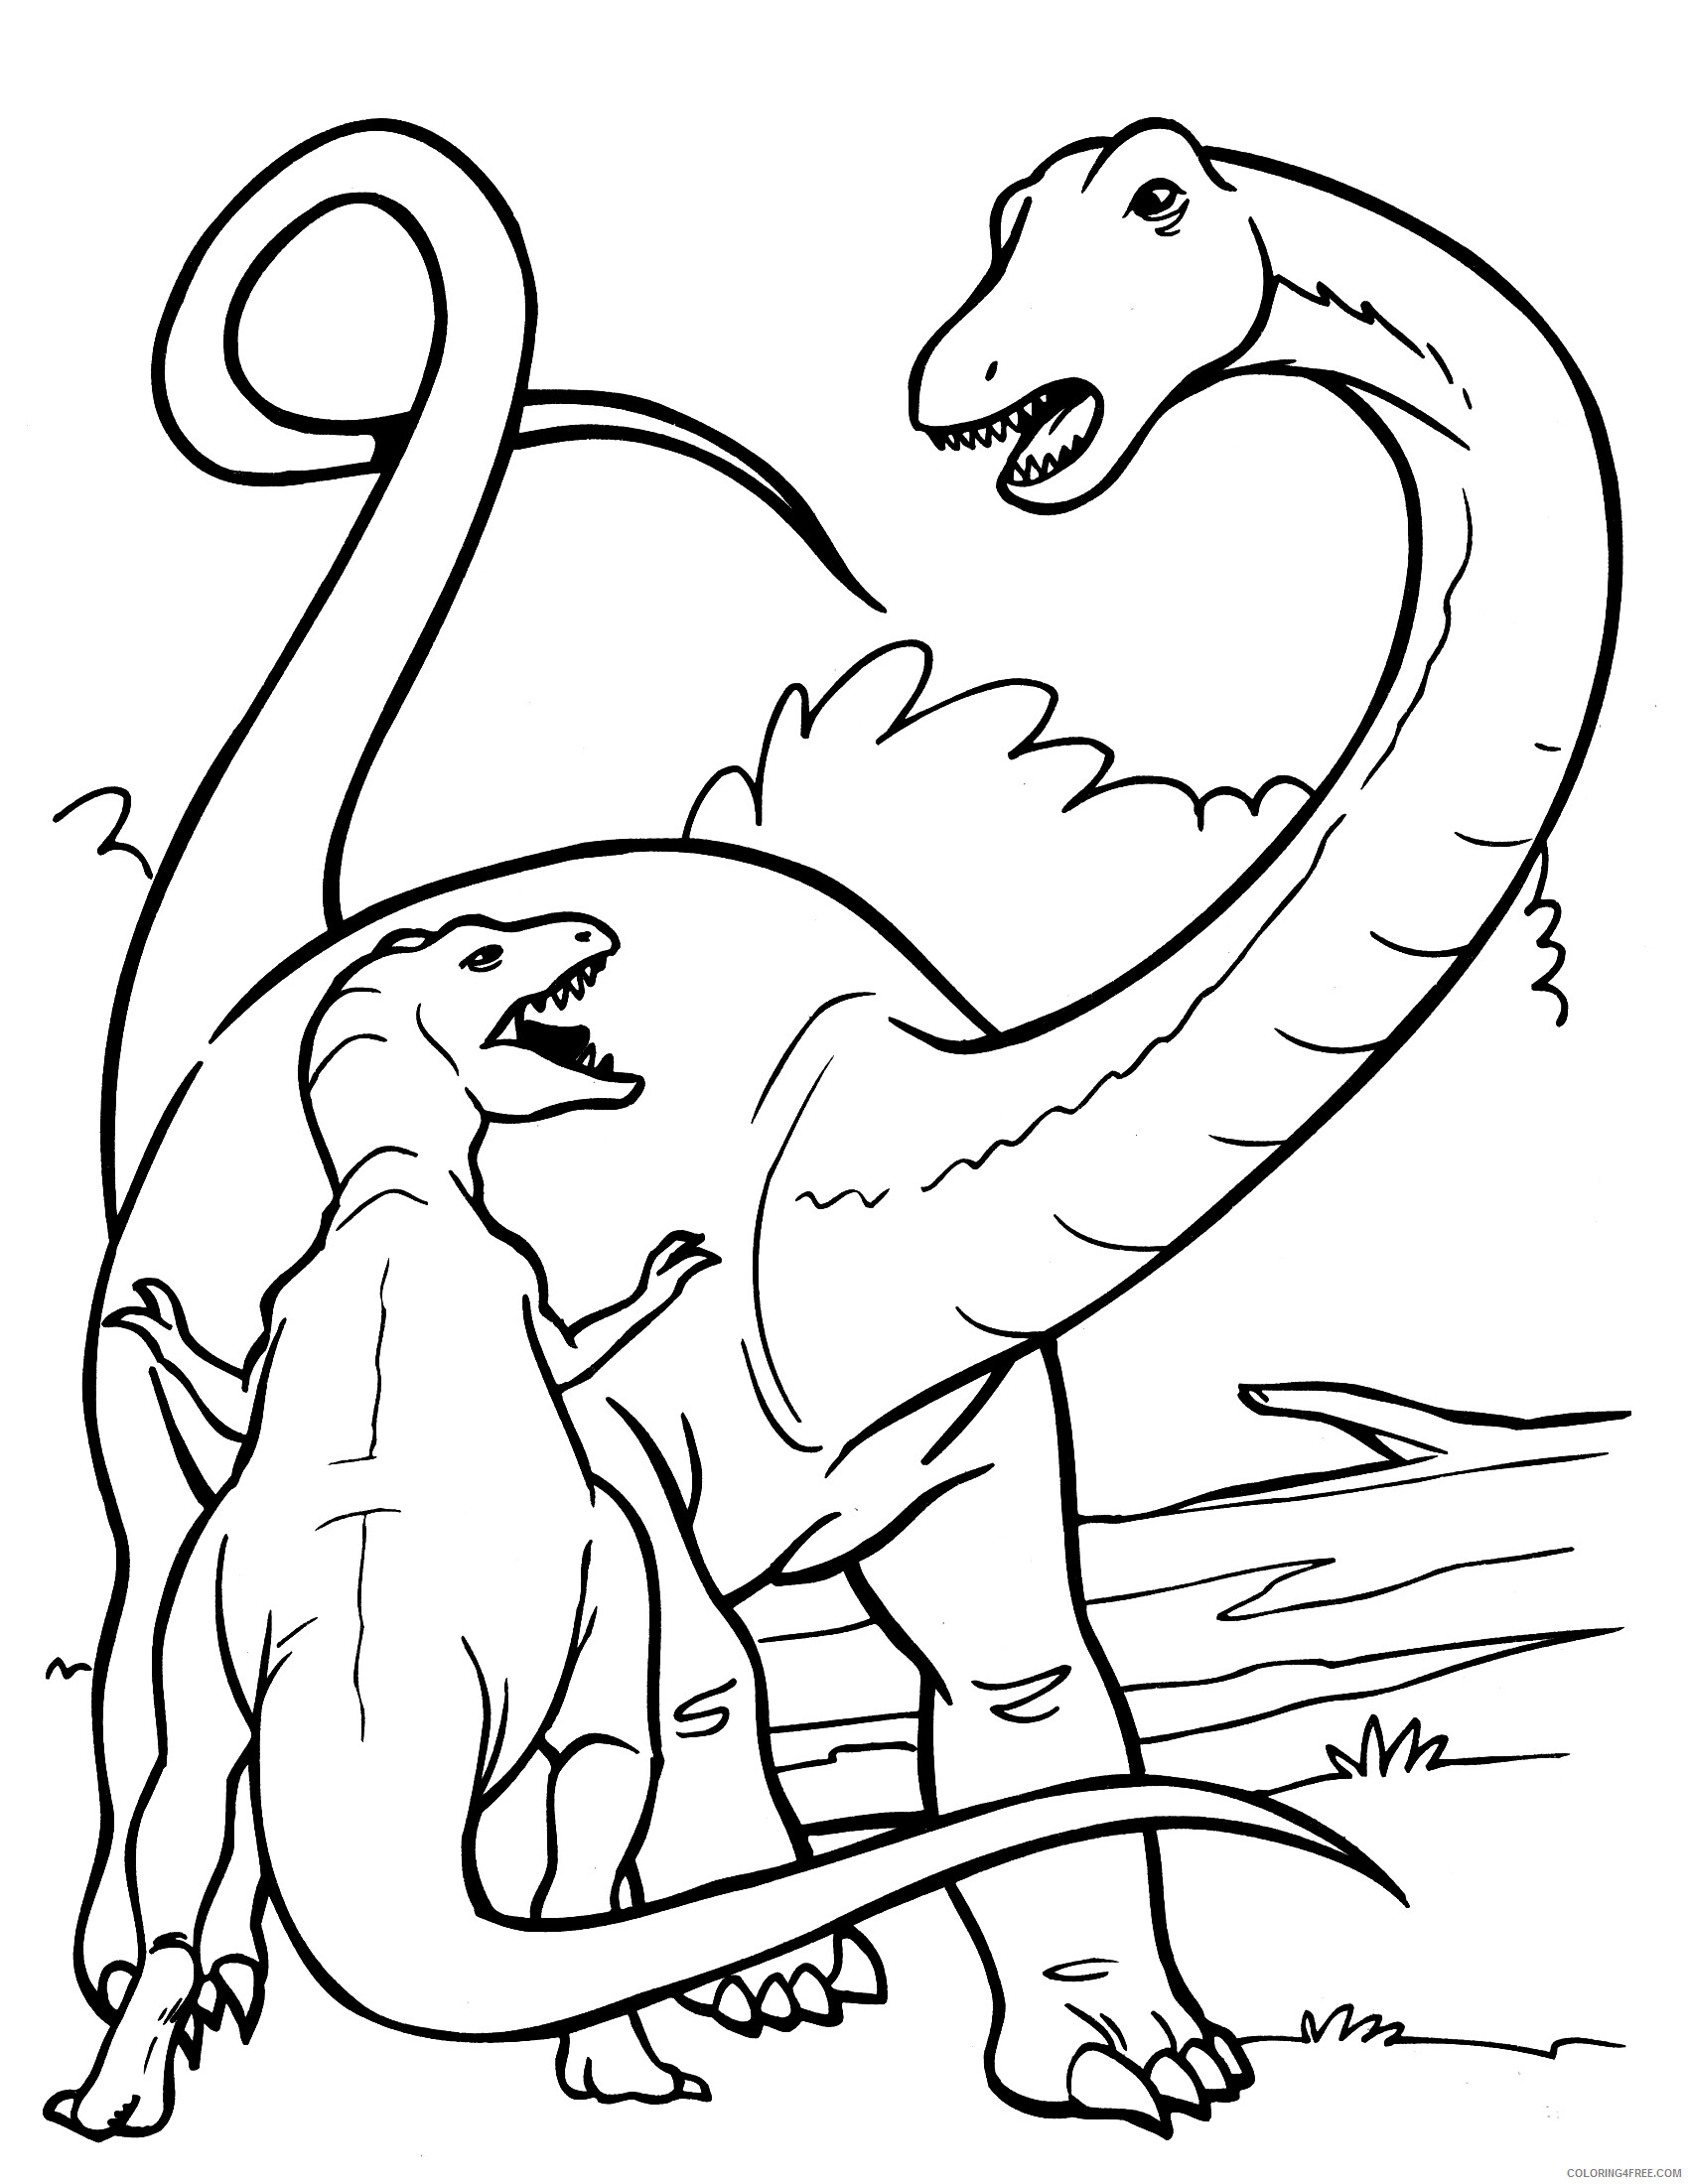 Dinosaurs Coloring Pages for boys of Dinosaur Printable 2020 0248 Coloring4free